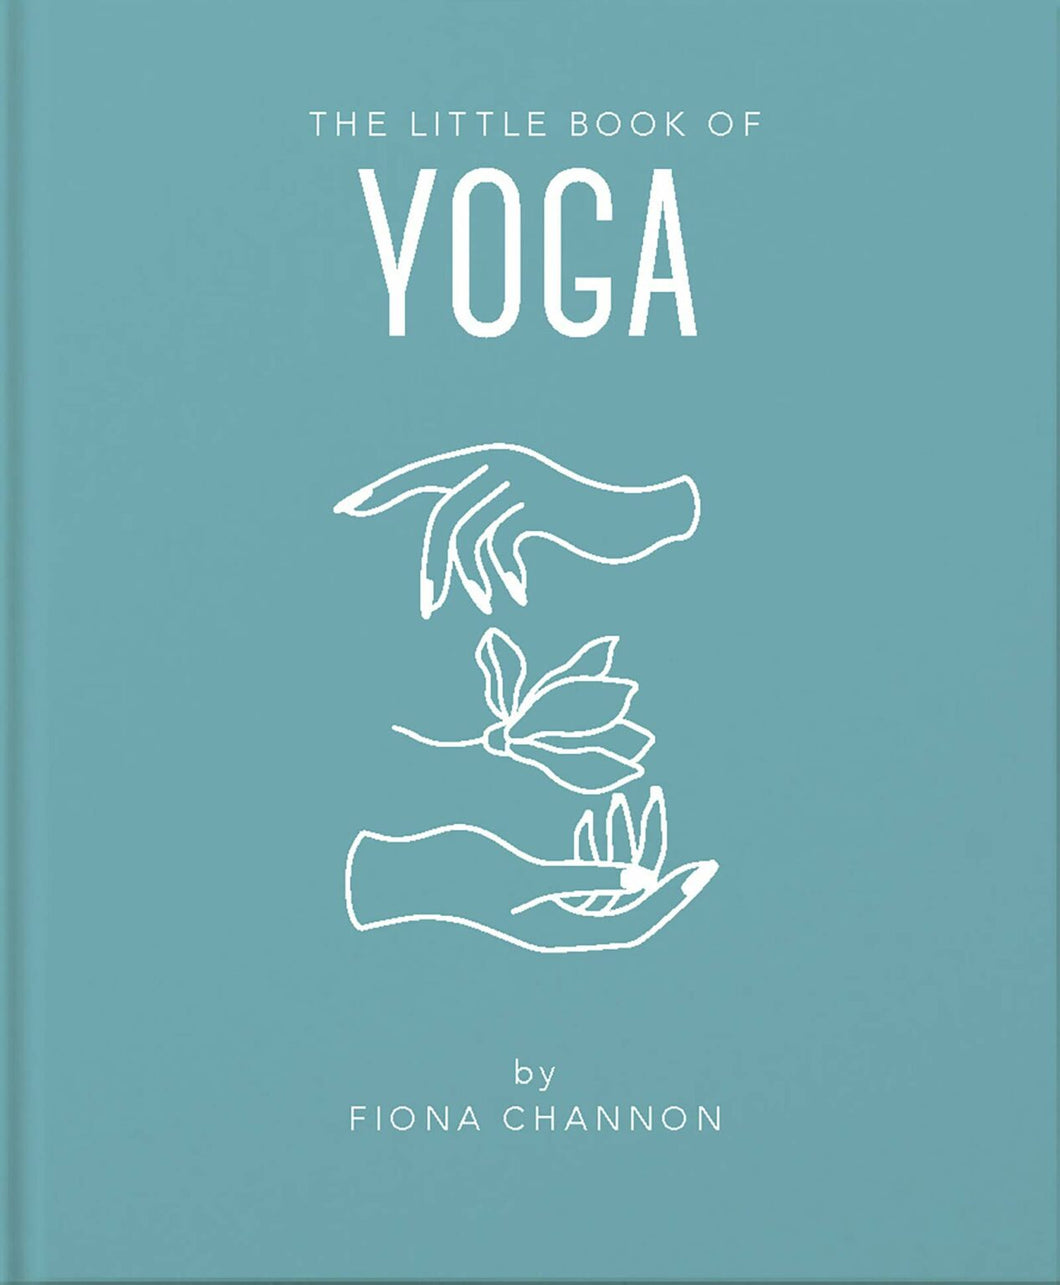 The little book of yoga